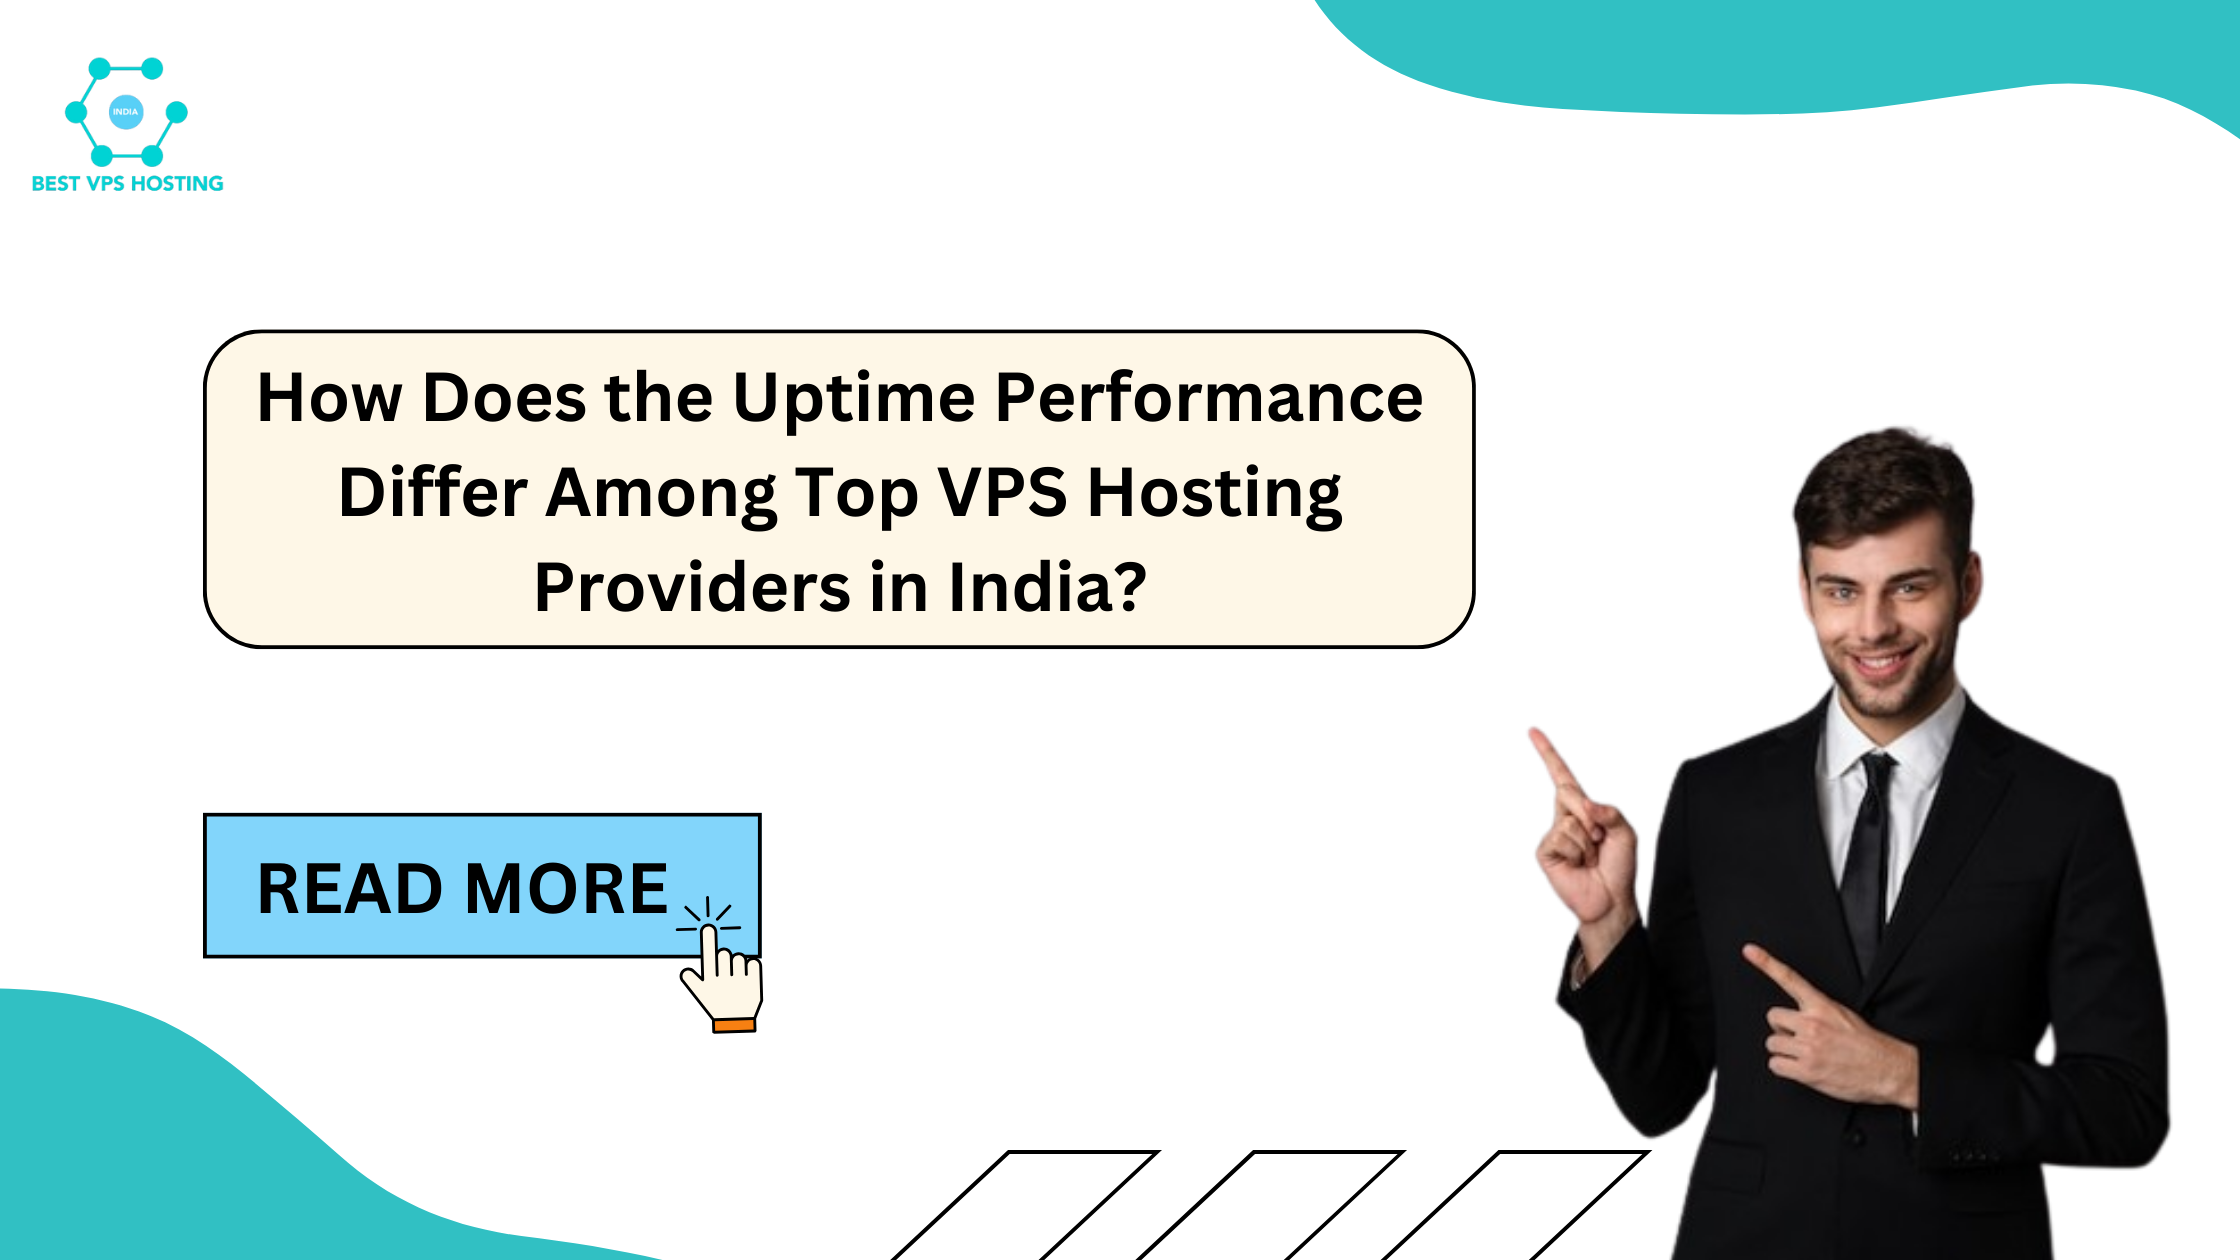 How Does the Uptime Performance Differ Among Top VPS Hosting Providers in India